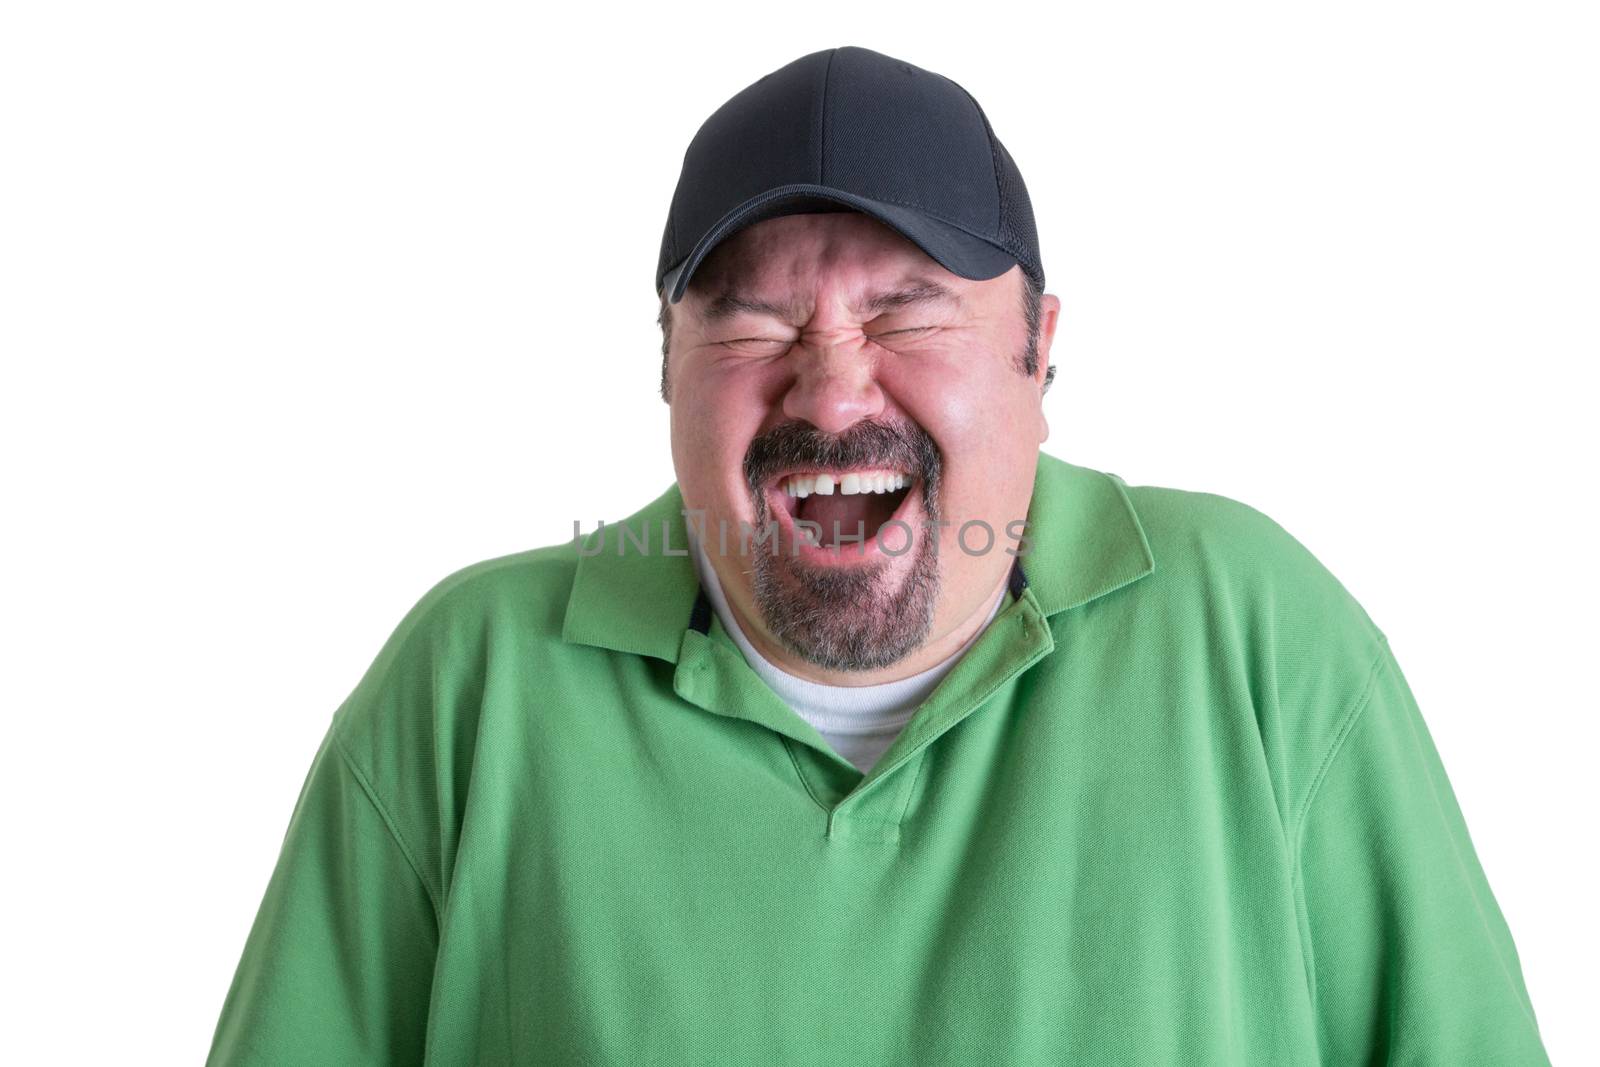 Portrait of Overweight Man Wearing Green Shirt and Black Baseball Cap Laughing Ecstatically in front of White Background, Head and Shoulders Portrait of Joyful Man